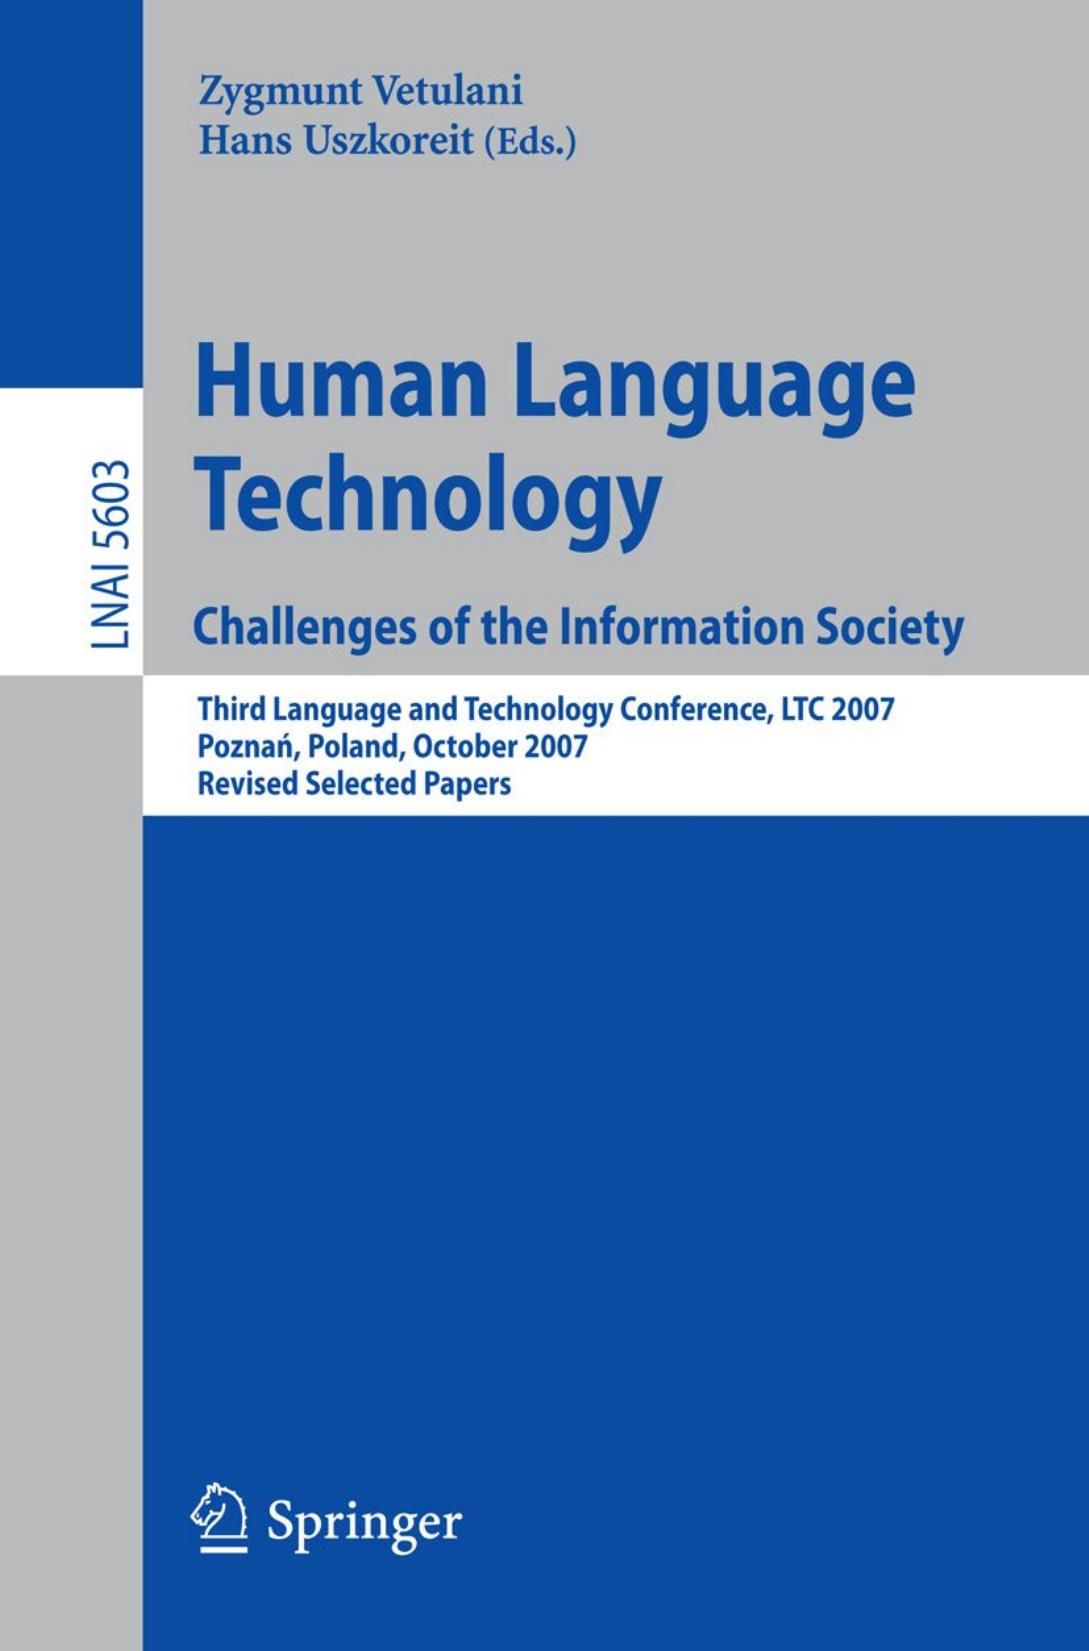 Human Language Technology. Challenges of the Information Society: Third Language and Technology Conference, LTC 2007, Poznan, Poland, October 5-7, 2007, Revised Selected Papers